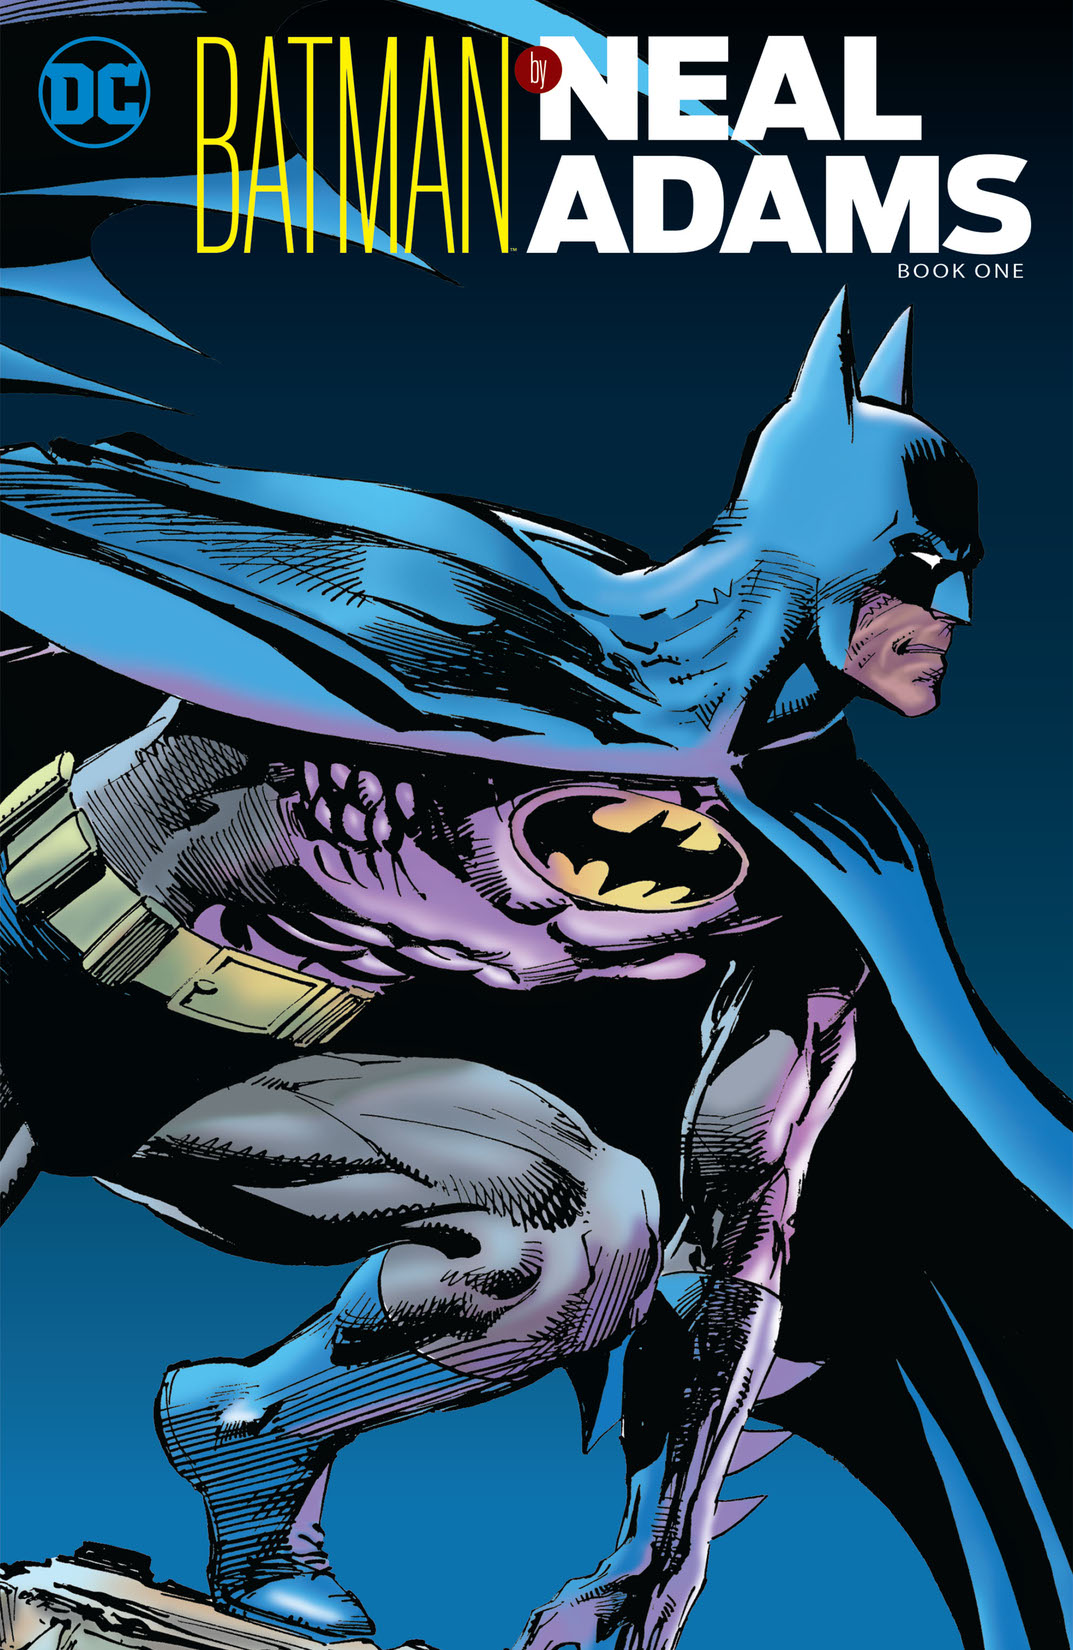 Batman by Neal Adams Book One preview images